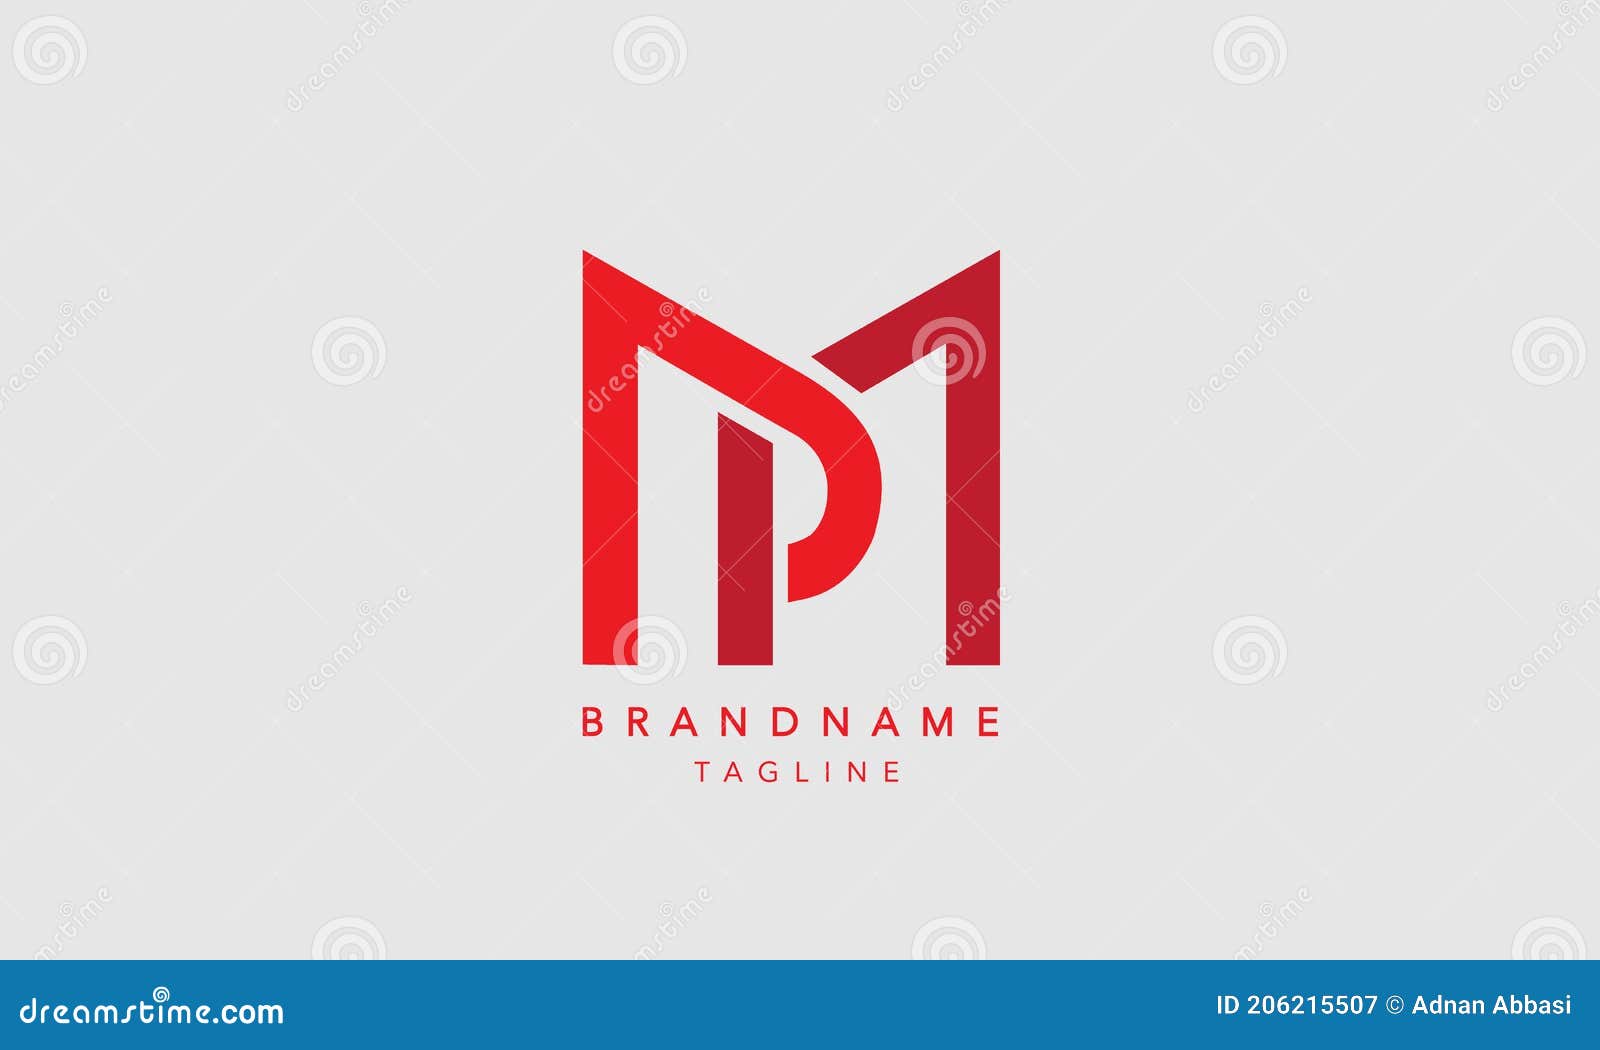 Pm Logo PNG, Vector, PSD, and Clipart With Transparent Background